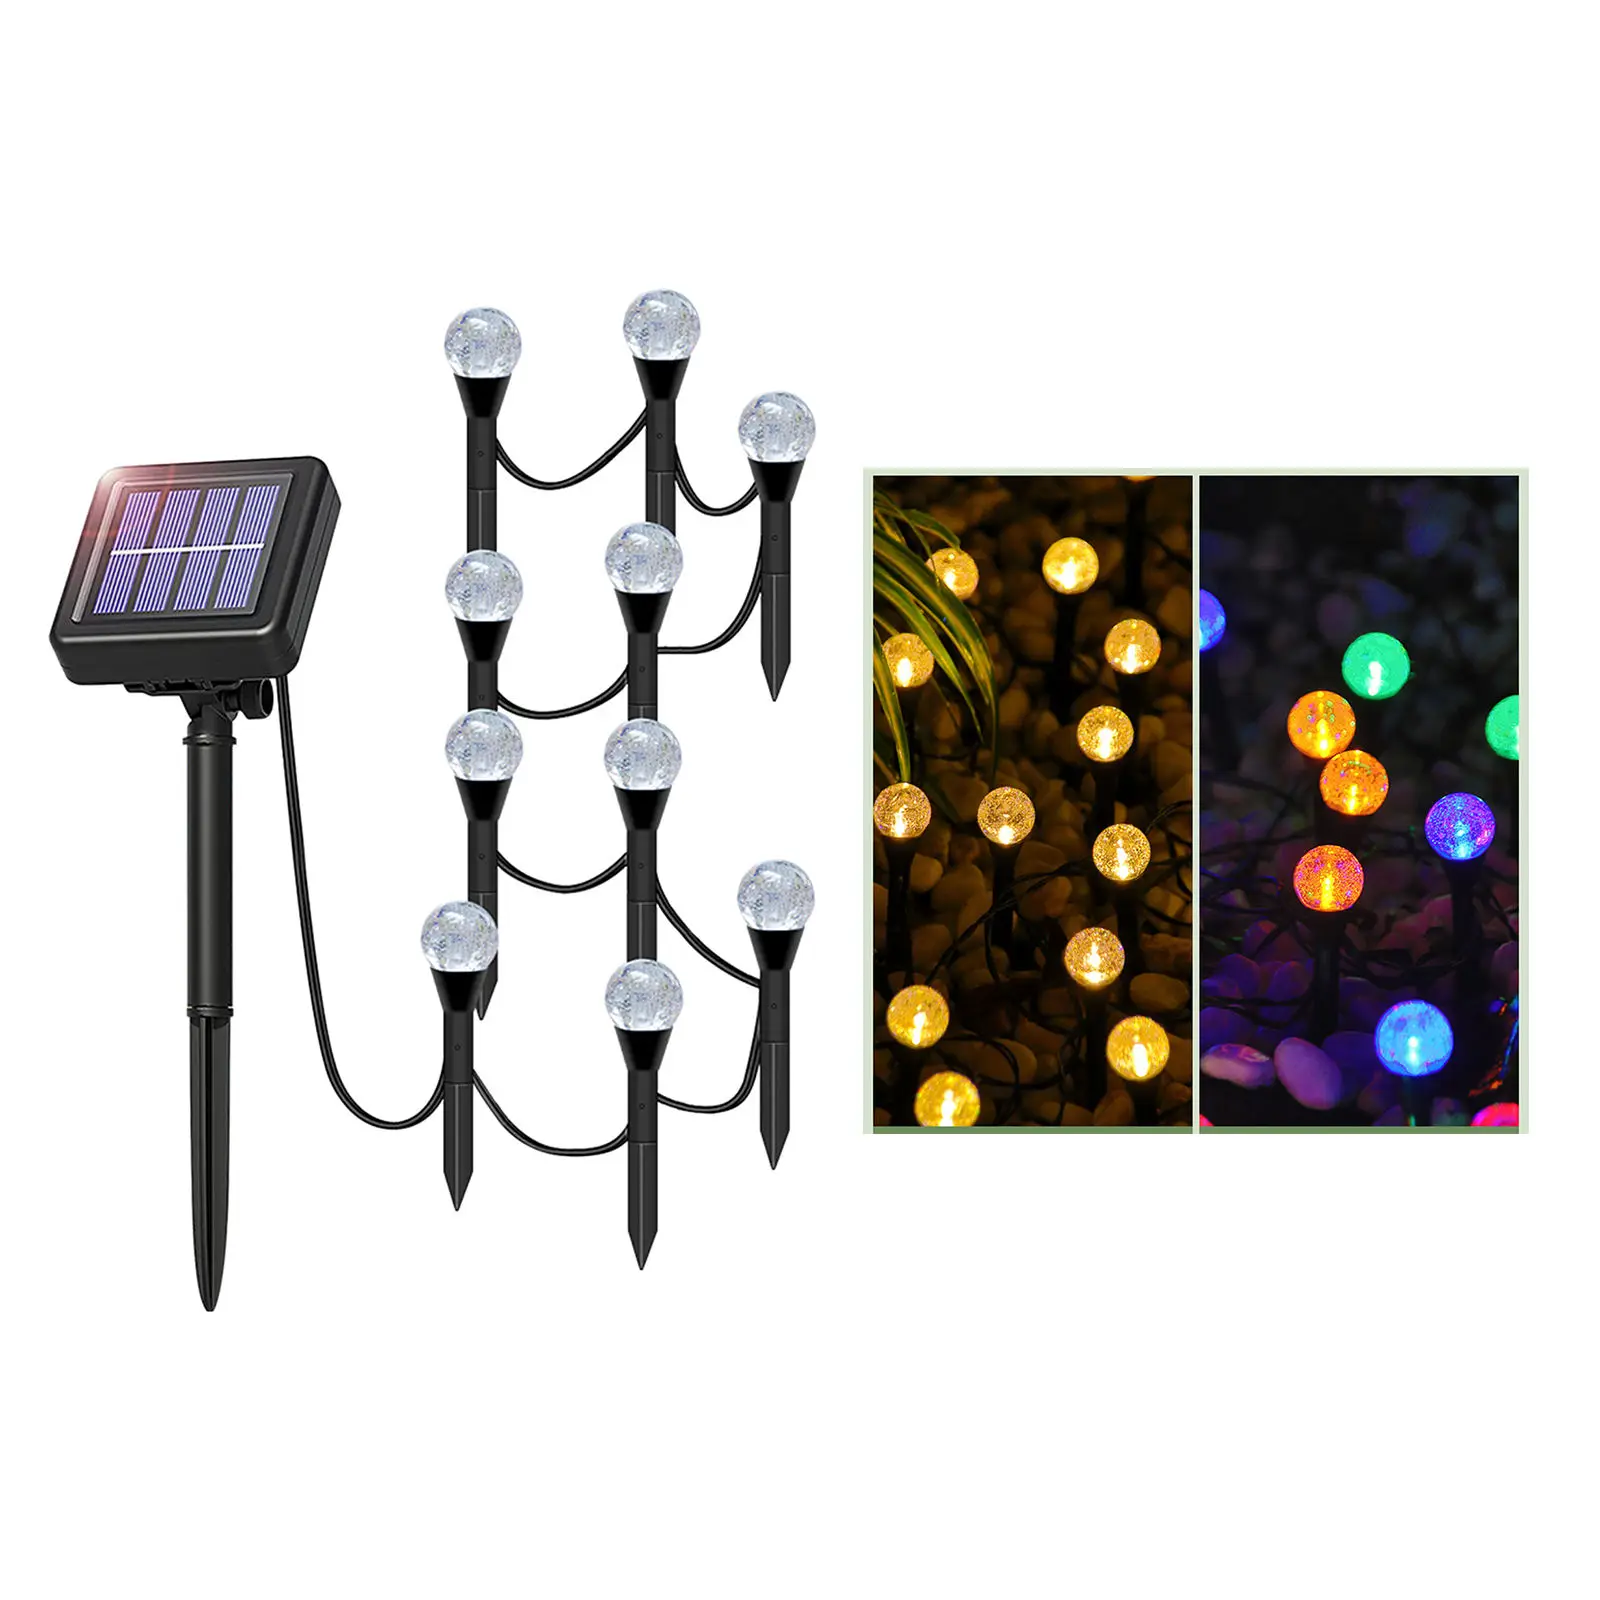 Rustproof Solar Powered Light Decorative In-Ground Garden Lights Night Lamp for Yard Lawn Patio Driveway Auto On/Off